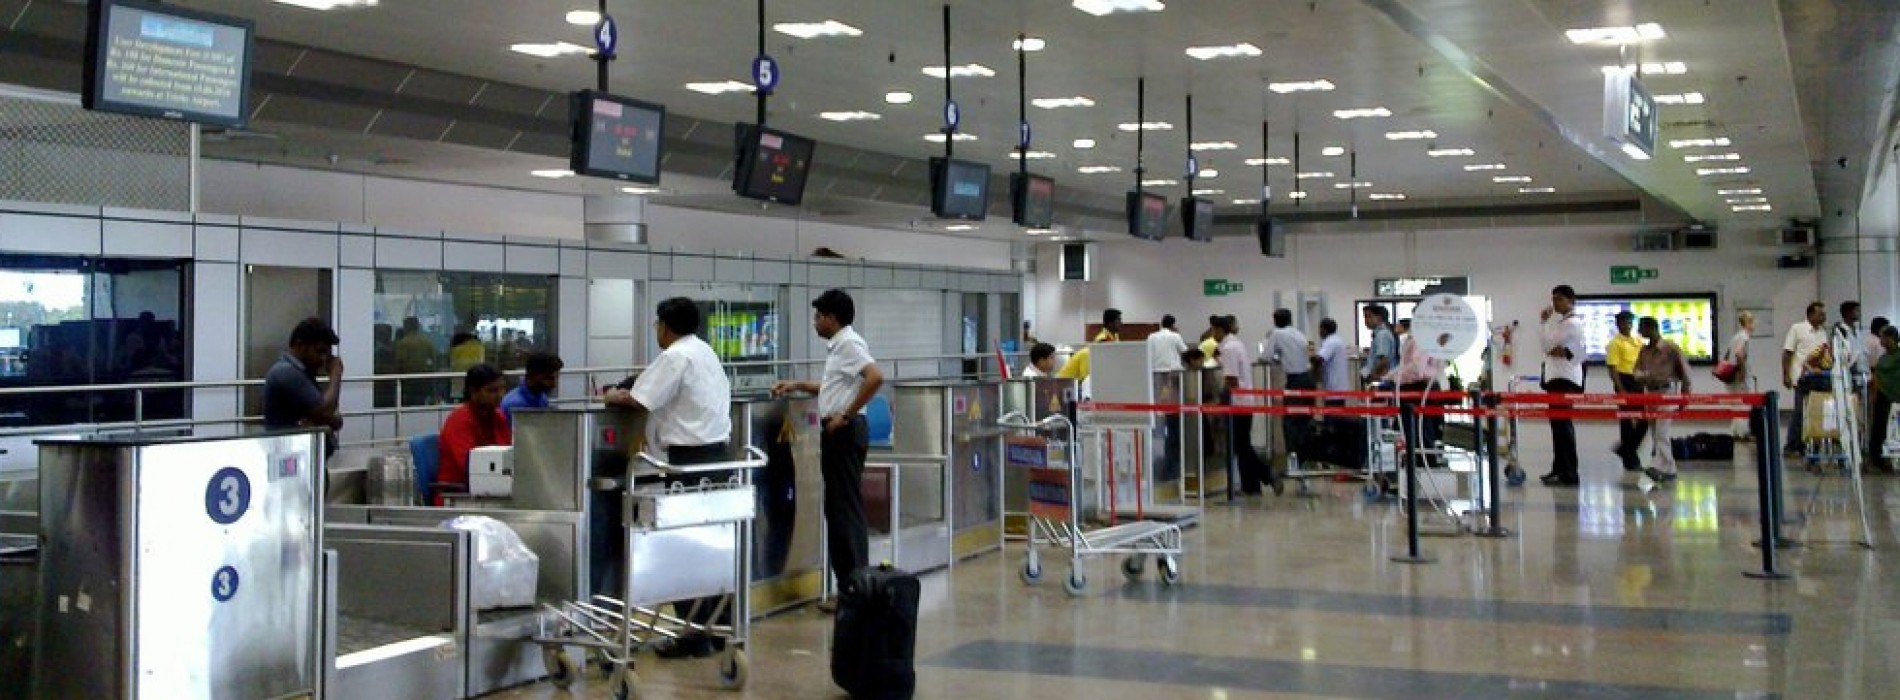 Aadhaar card based e-gates at airports in India to make travel seamless